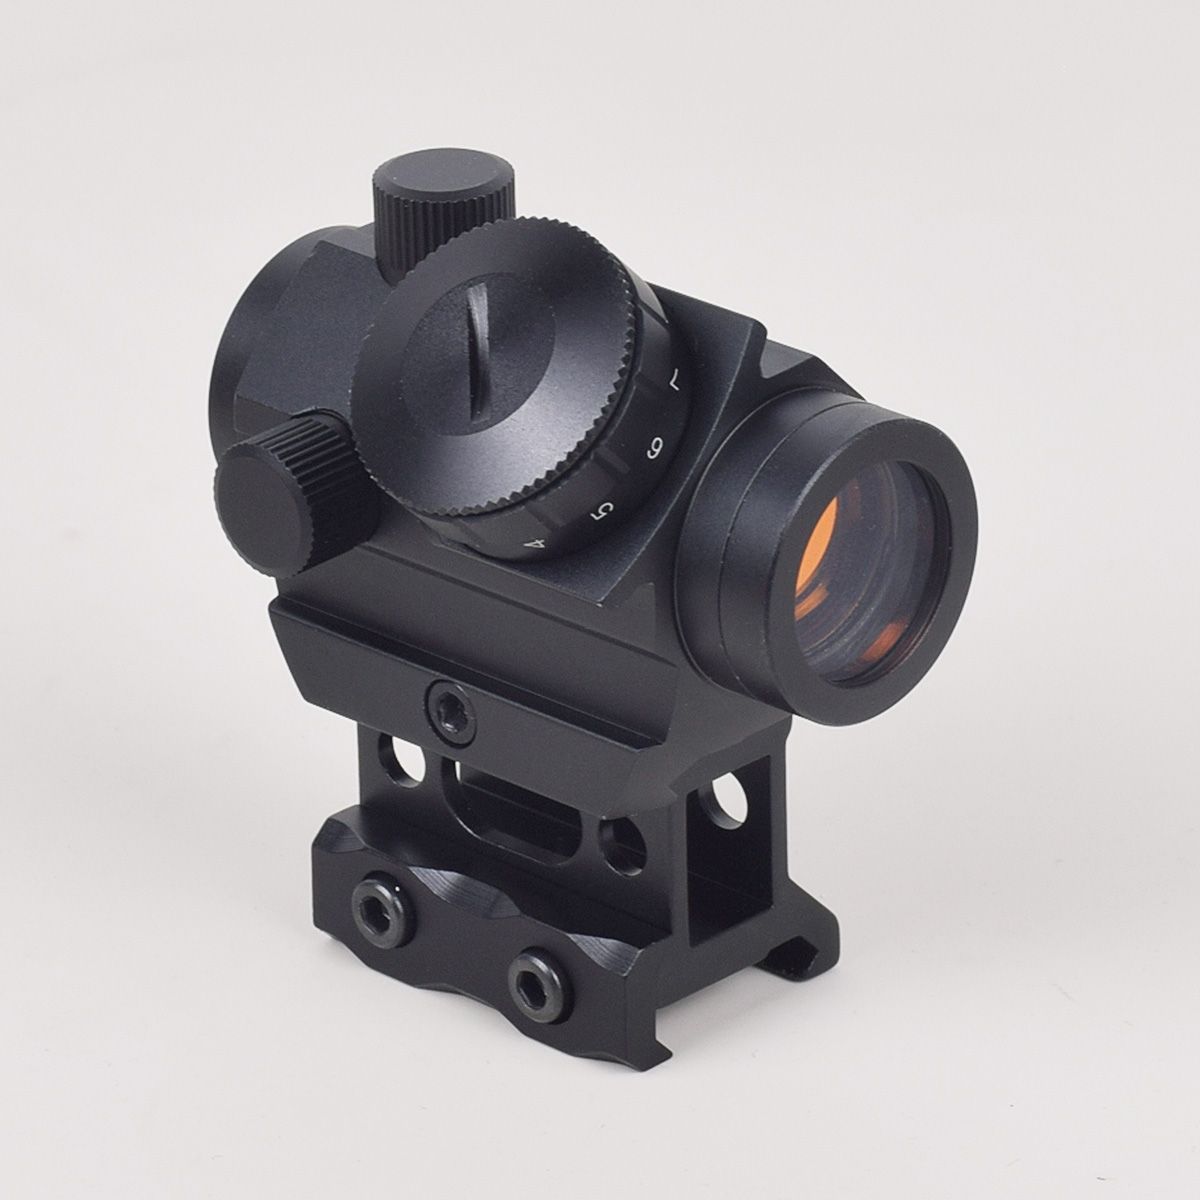 Sight and Riser Mount